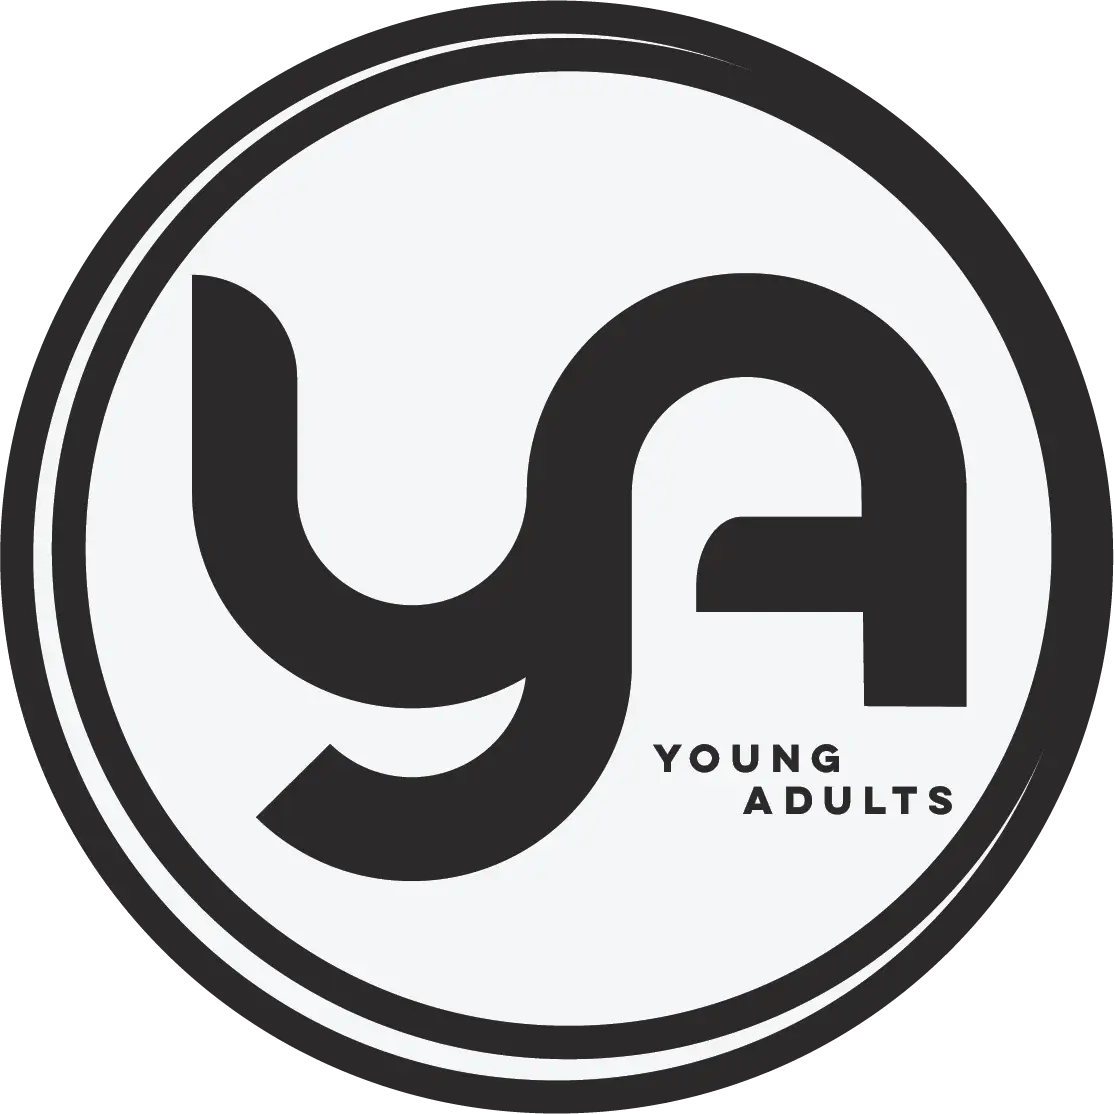 A black and white logo of young adults.